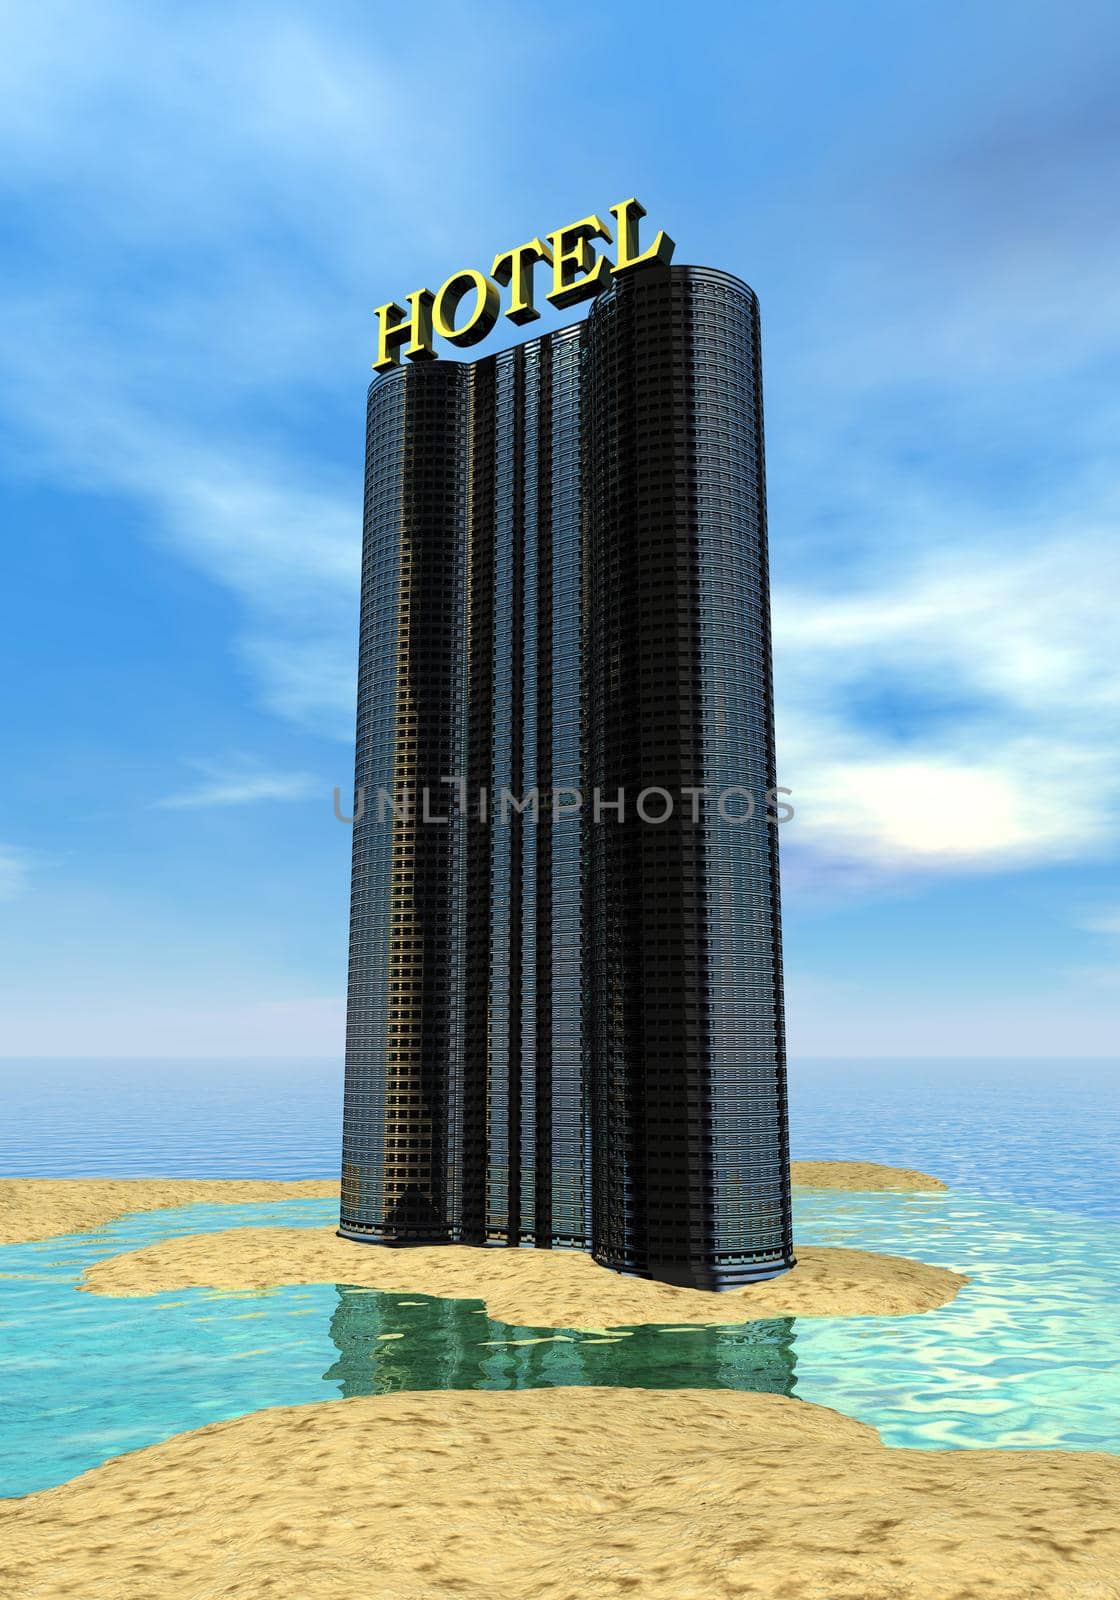 Hotel at the beach - 3D render by Elenaphotos21